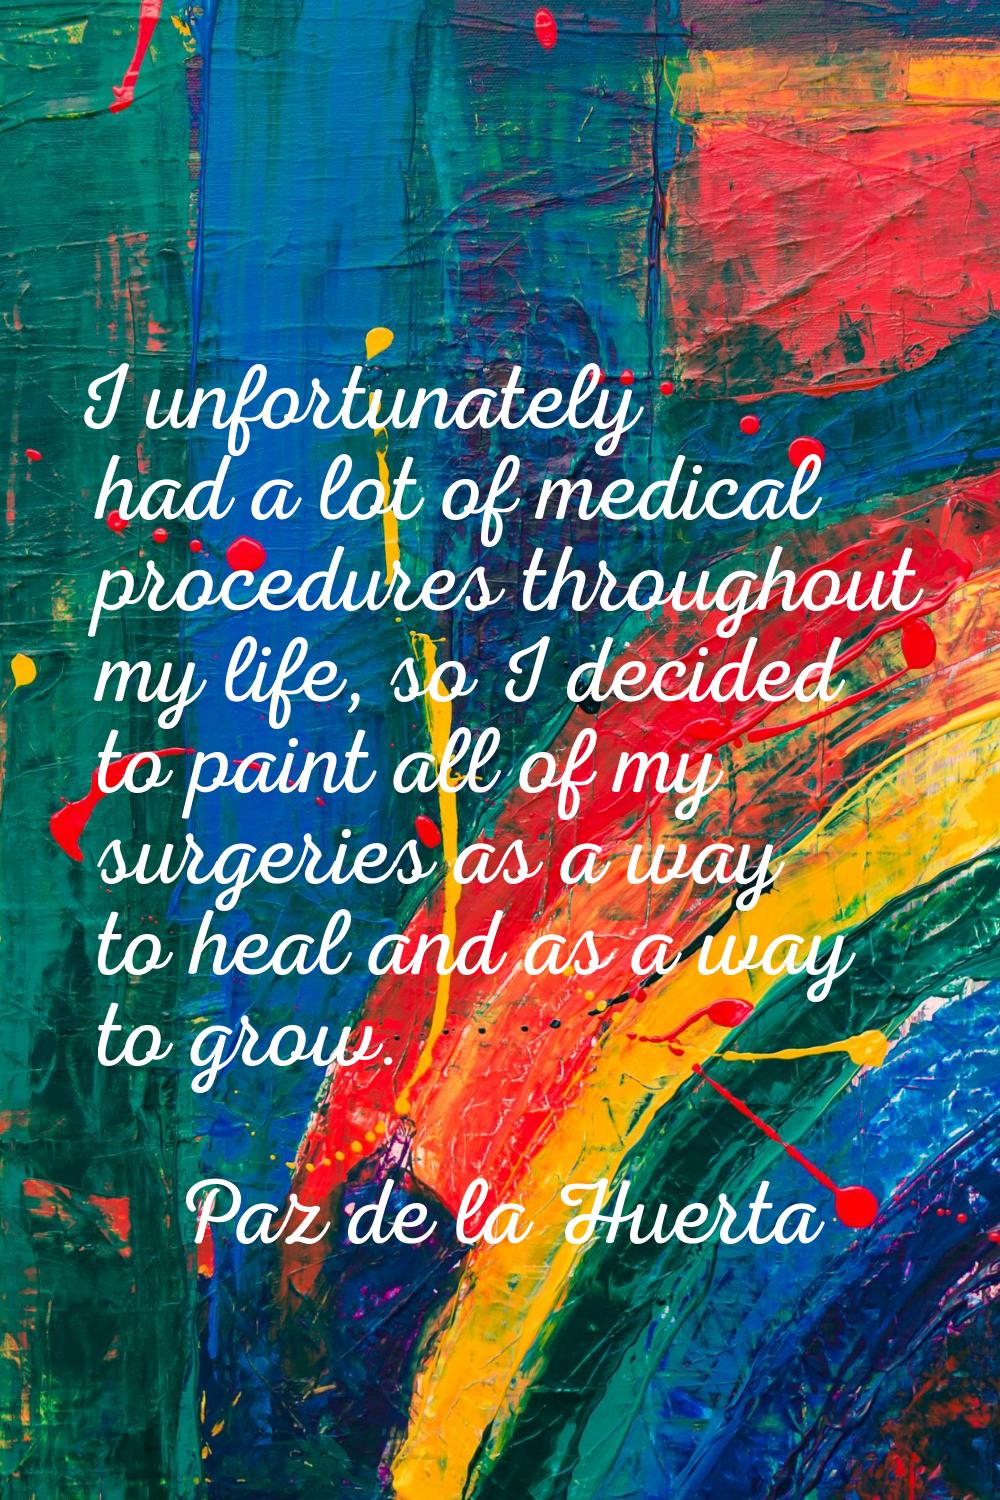 I unfortunately had a lot of medical procedures throughout my life, so I decided to paint all of my